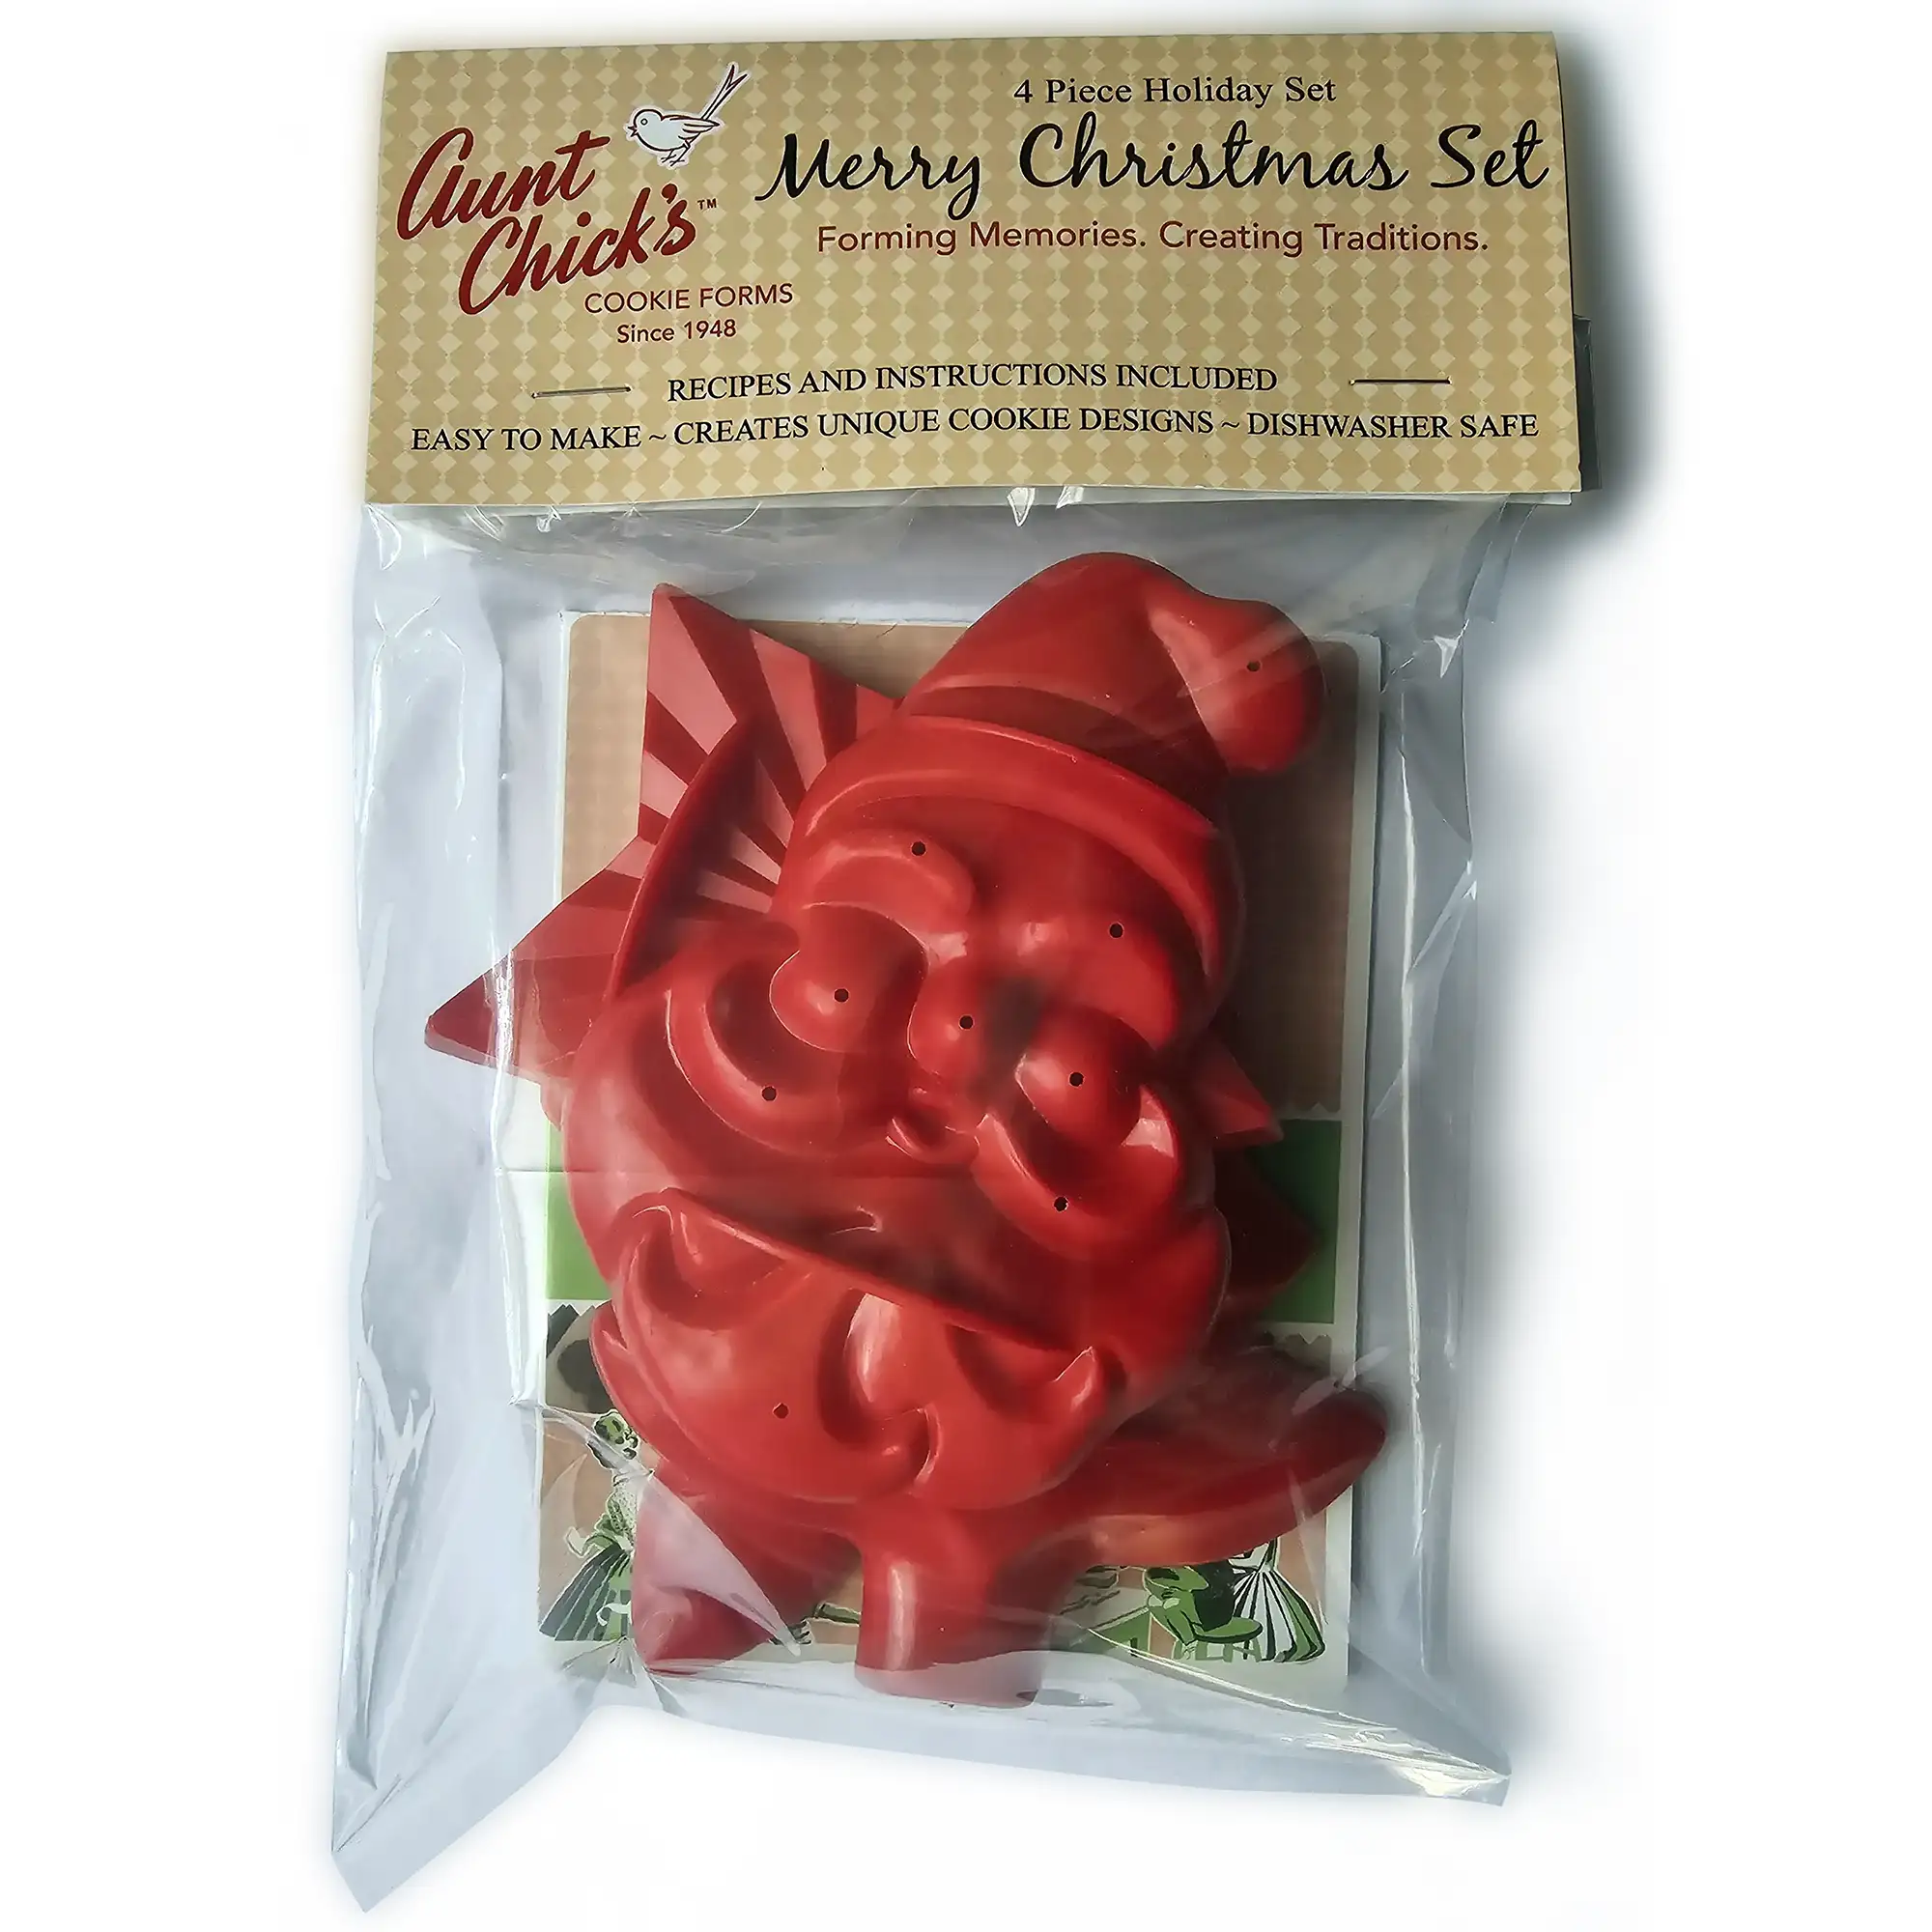 Aunt Chick's Merry Christmas Set - Bagged Set with Recipe and Decorating INstructions